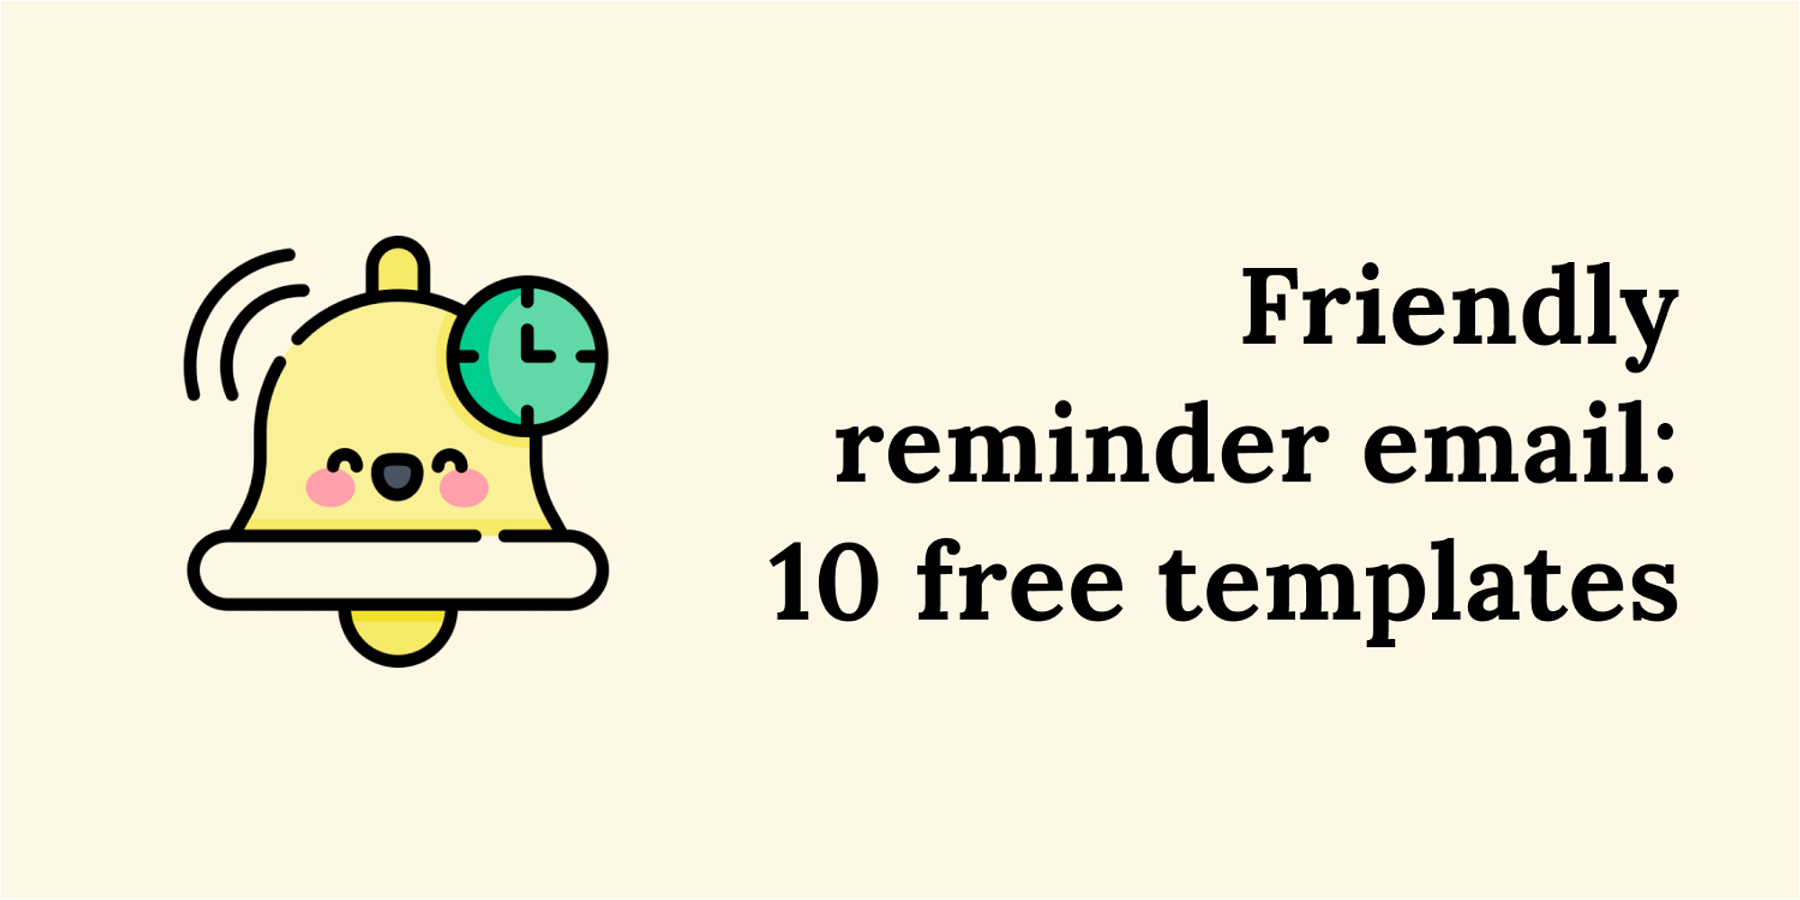 Friendly reminder email: 10 ready-to-use templates you could try